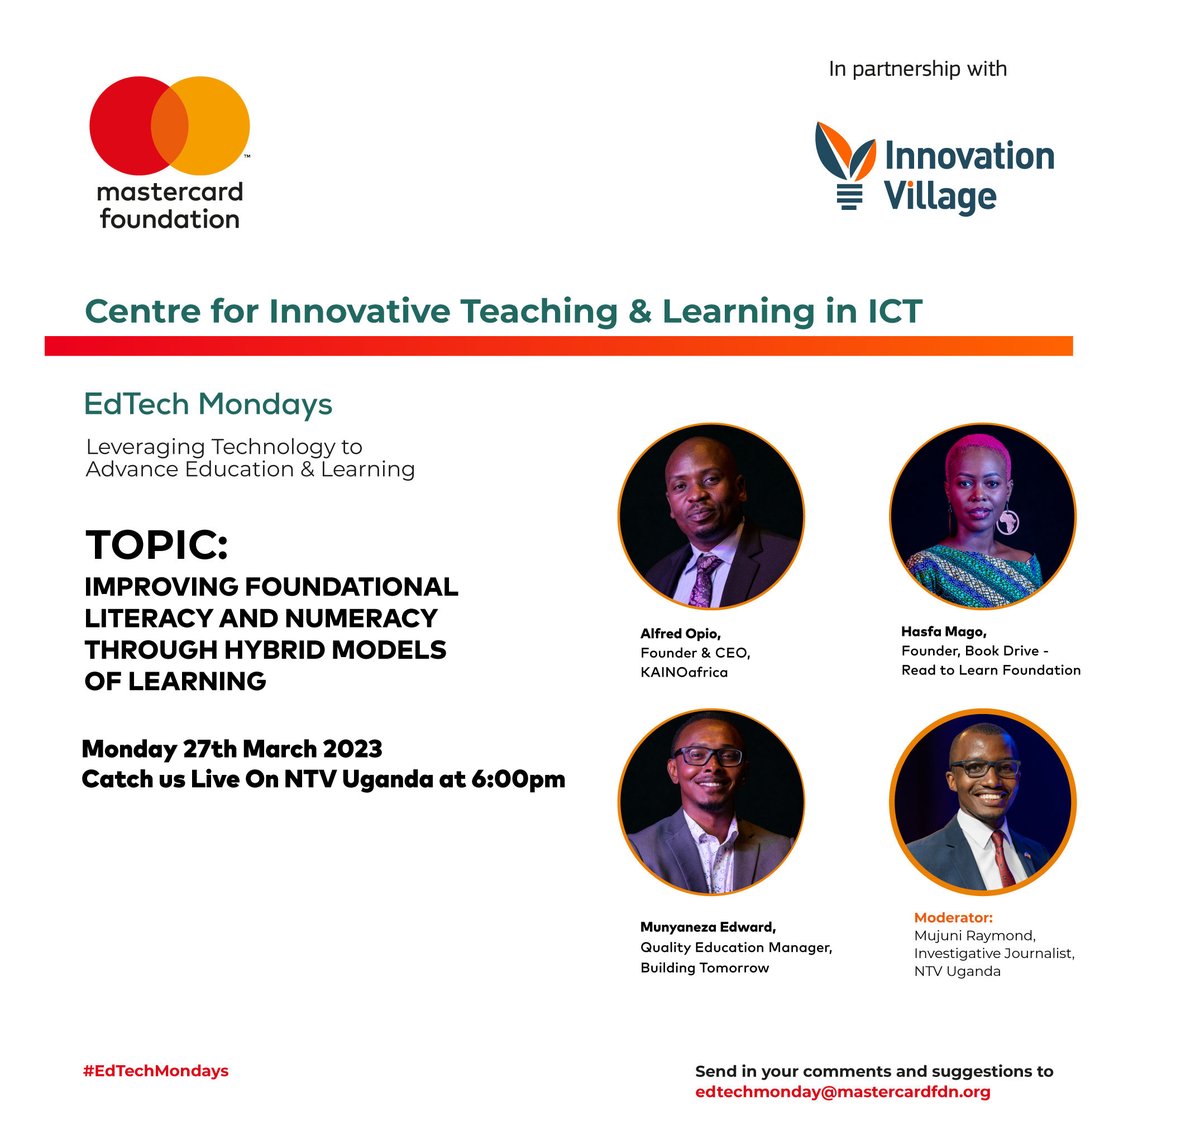 Don't miss the 2nd episode of the #EdTechMonday show as we interrogate issues of teaching quality, curriculum development & mode of delivery, which are critical aspects in achieving foundational literacy & numeracy to secure positive learning outcomes for learners in Uganda.